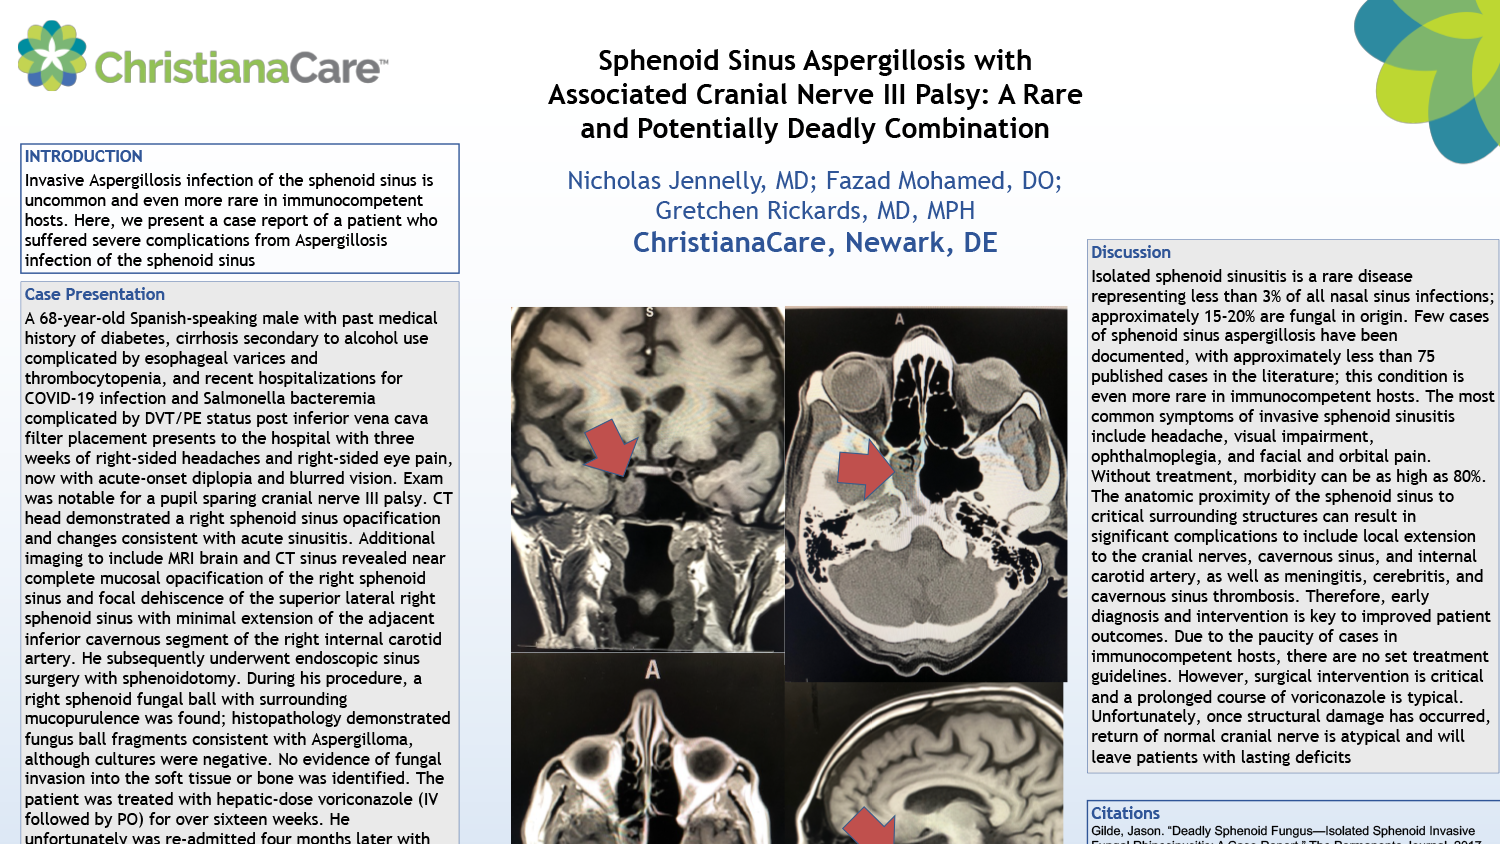 Nicholas Jennelly - PAS-77-Sphenoid-Sinus-Aspergillosis-With-Associated-Cranial-Nerve-III-Palsy-A-Rare-And-Potentially-Deadly-Combination